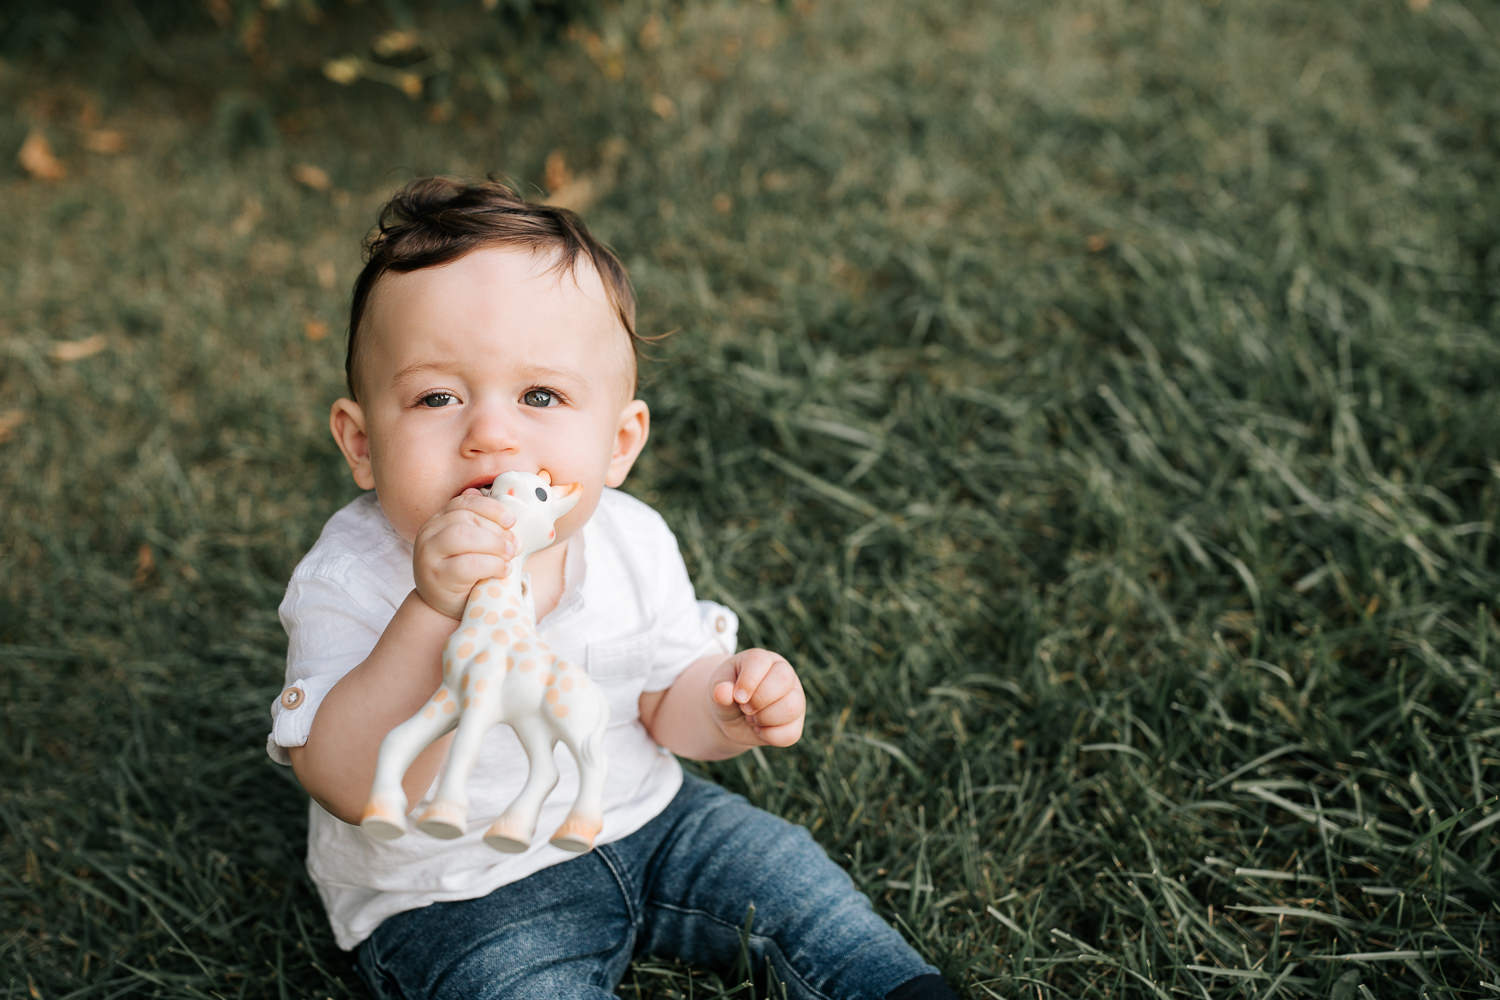 9 month old baby boy with dark hair wearing white t-shirt, jeans and sneakers sitting on grass chewing on Sophie the giraffe, looking at camera - Newmarket Lifestyle Photos